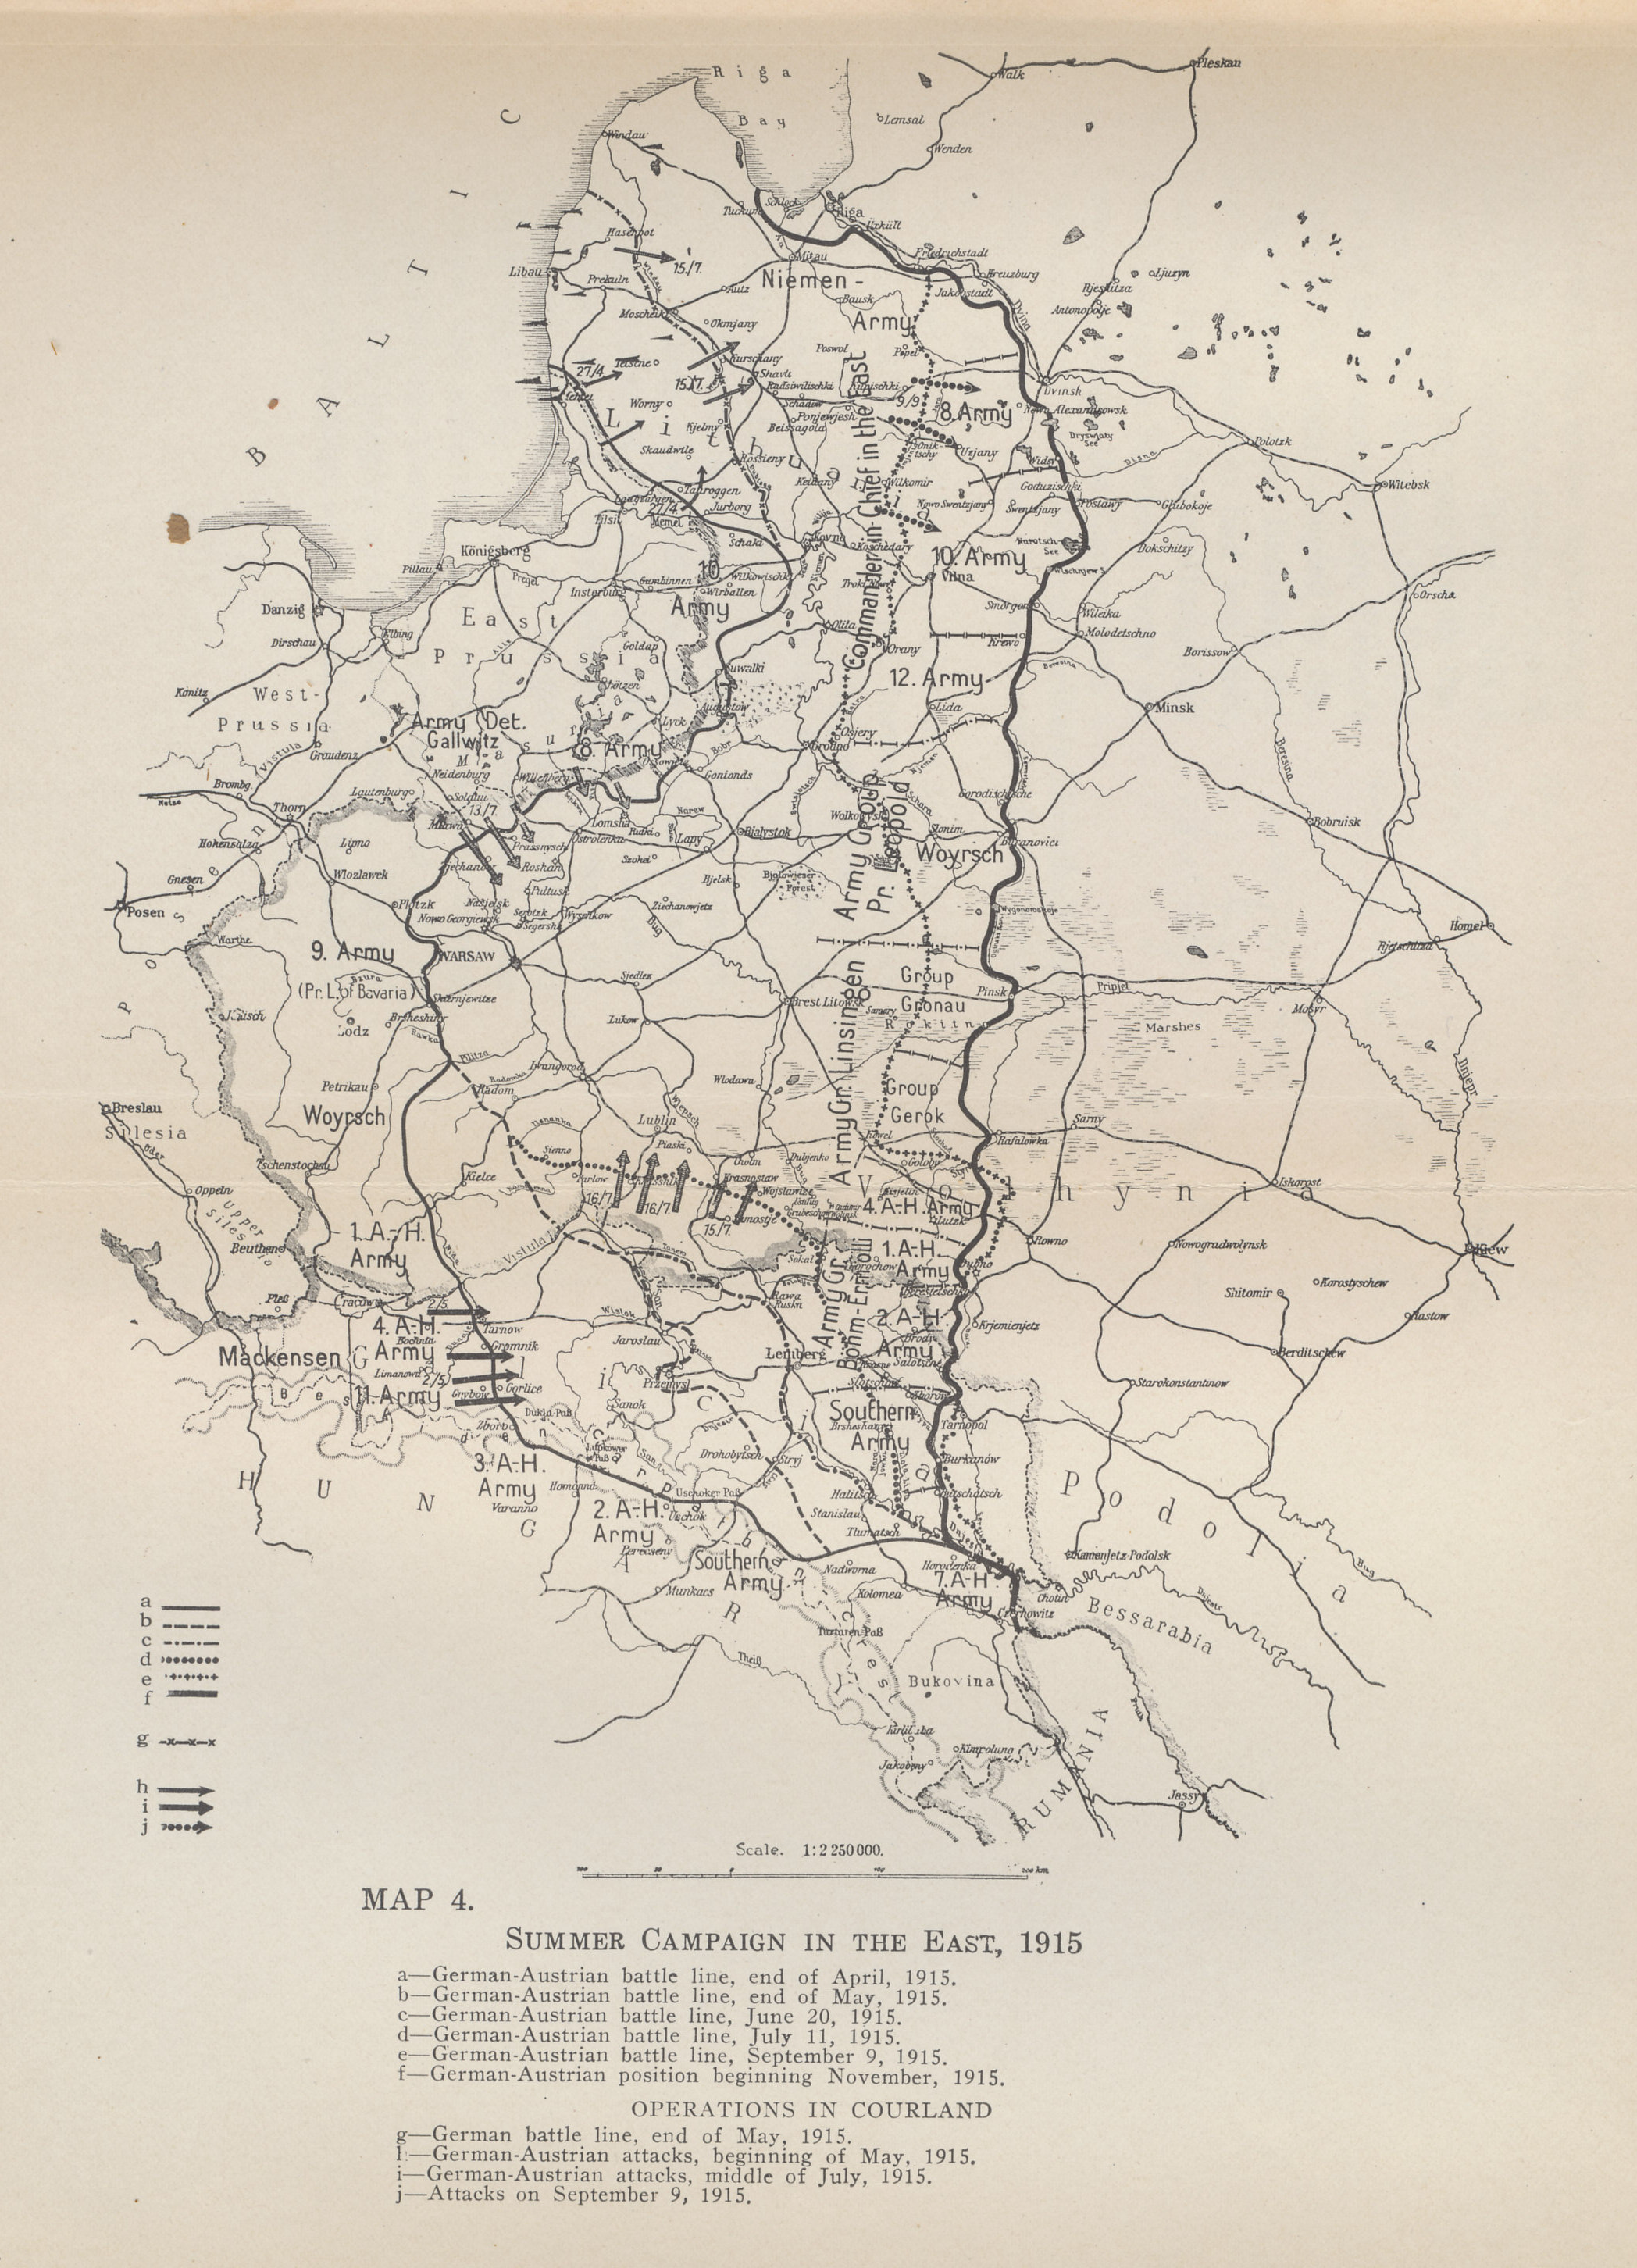 Map of the Eastern Front in the summer of 1915 as the German-Austro-Hungarian Gorlice-Tarnow Offensive continued to advance against the retreating Russians. From 'The German General Staff and its Decisions, 1914-1916' by General von Falkenhayn.
Text:
Map 4.
Summer Campaign in the East, 1915
a—German-Austrian battle line, end of April, 1915.
b—German-Austrian battle line, end of May, 1915.
c—German-Austrian battle line, June 20, 1915.
d—German-Austrian battle line, July 11, 1915.
e—German-Austrian battle line, September 9, 1915.
f—German-Austrian battle line, beginning November, 1915.
Operations in Courland
g—German battle line, end of May, 1915.
h—German-Austrian attacks, beginning of May, 1915.
i—German-Austrian attacks, middle of July, 1915.
j—Attacks on September 9, 1915.